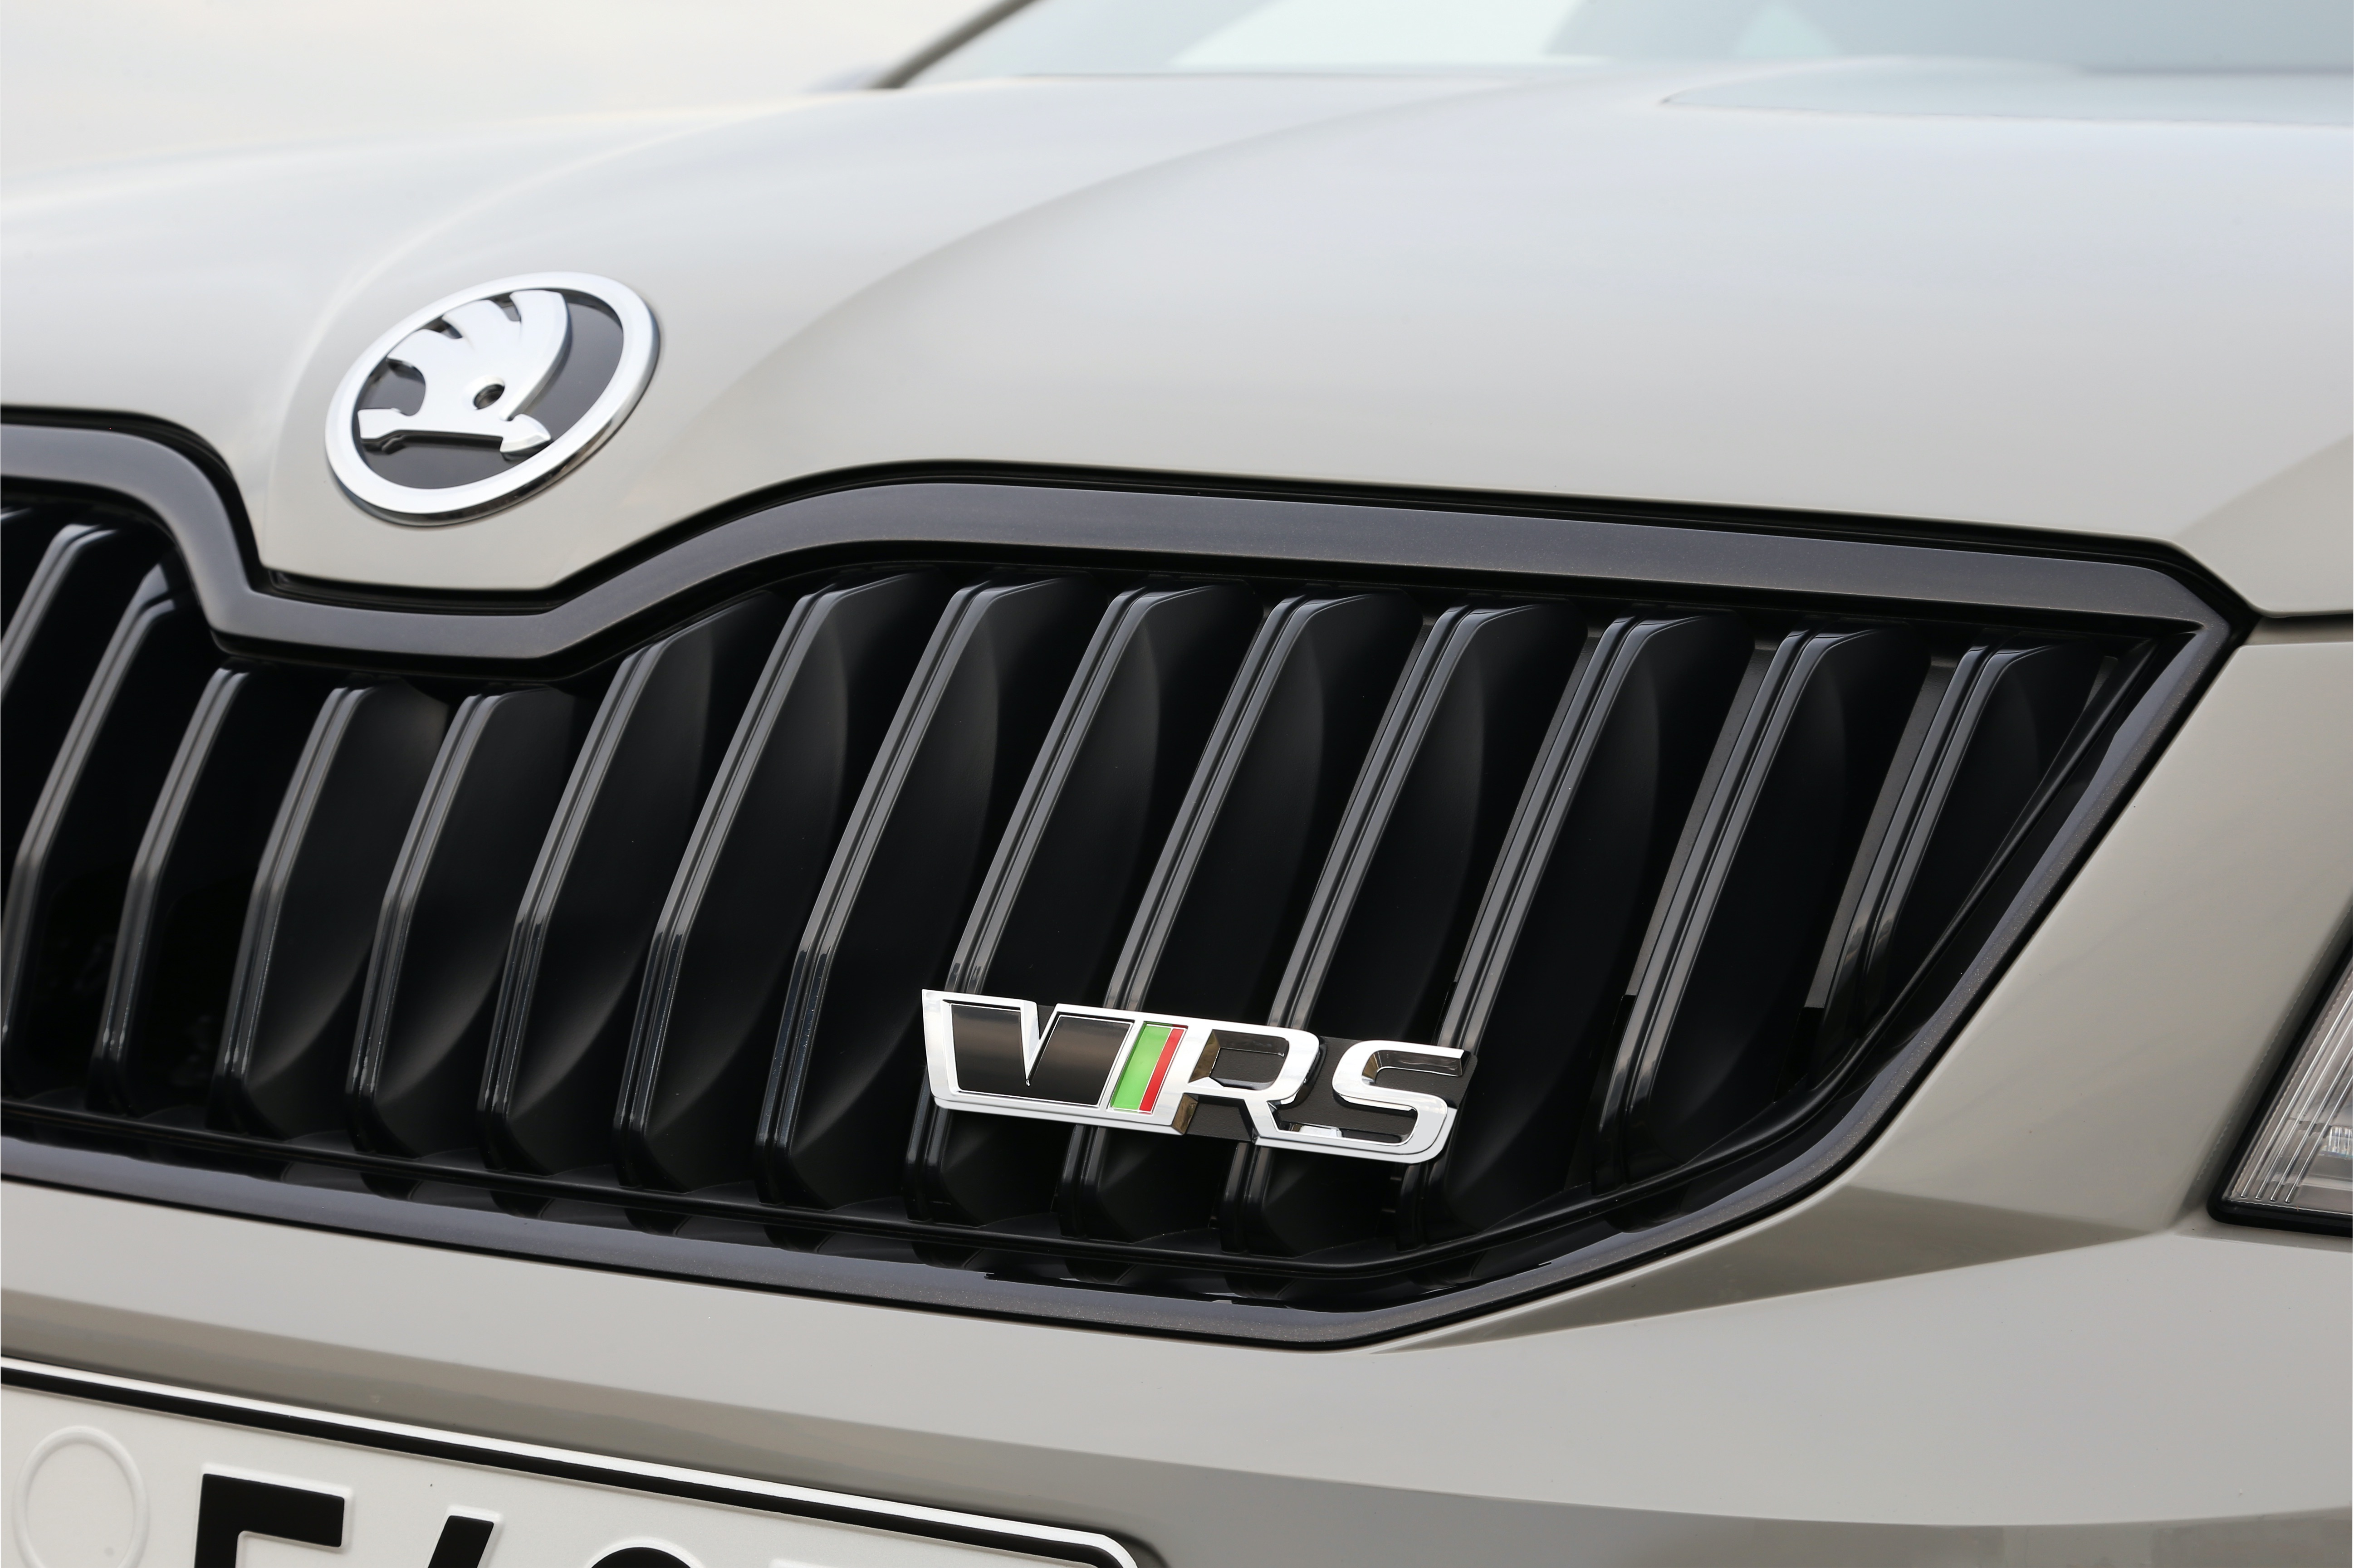 The new VRS is here!